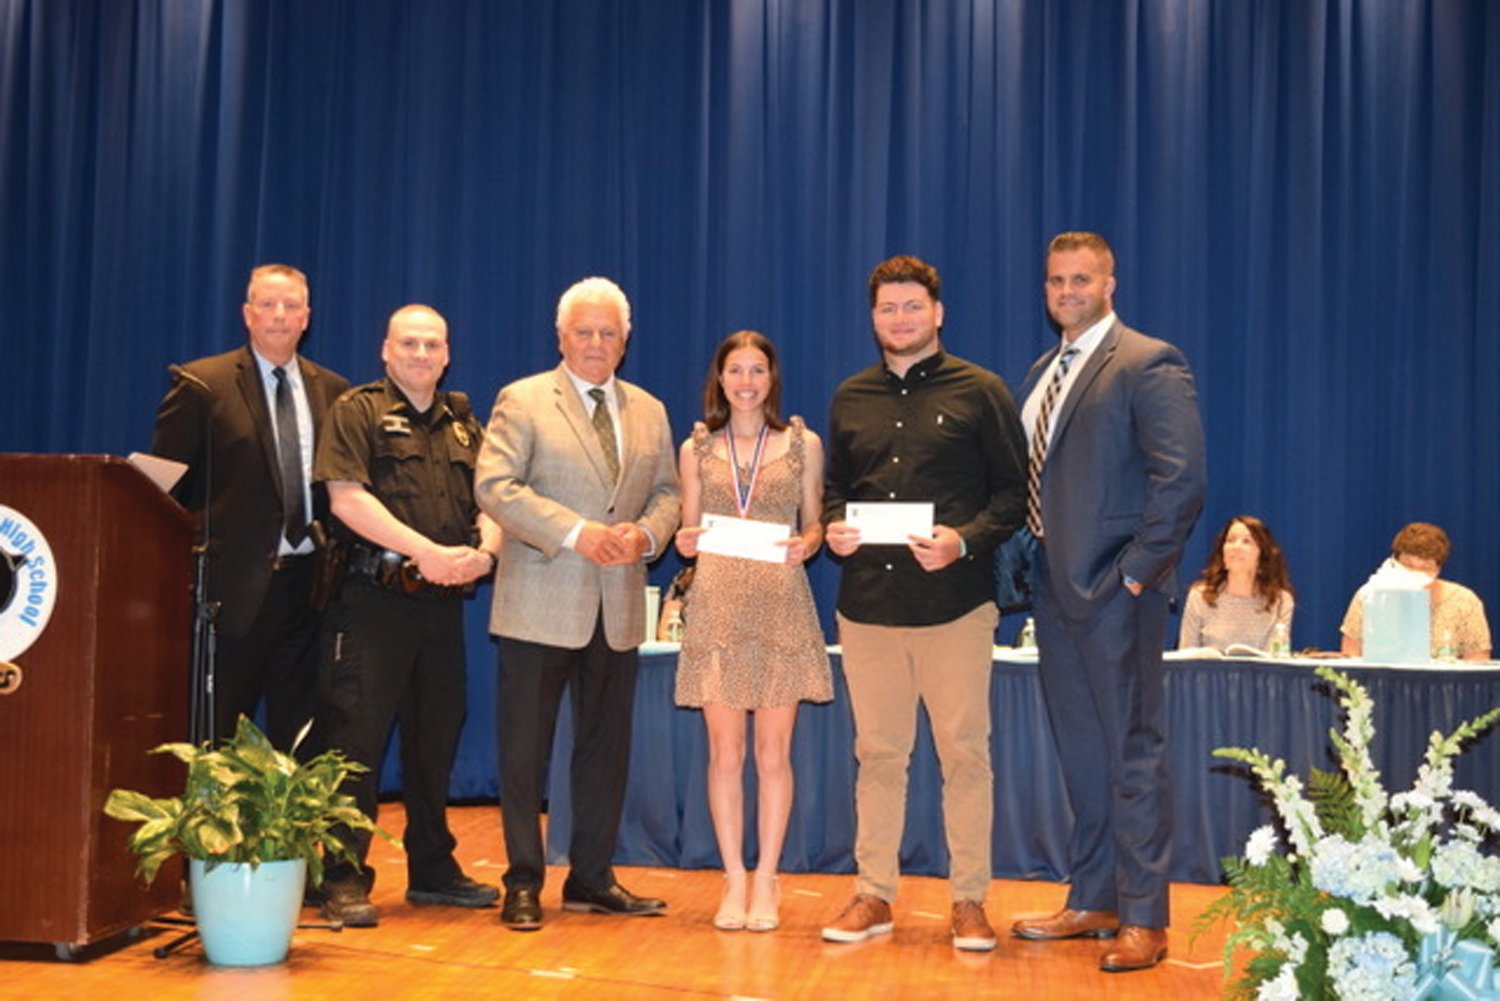 CHIEF’S CORNER: Now retired JPD Chief Richard S. Tamburini had the honor of presenting a scholarship in his name to JHS seniors Emily Iannuccilli and Ryan Schino during last Thursday’s Senior Honors Awards Night. They’re joined by Local 307 President Detective James Seymour, Lt. David Loffler and School Resource Officer Louis Cotoia.